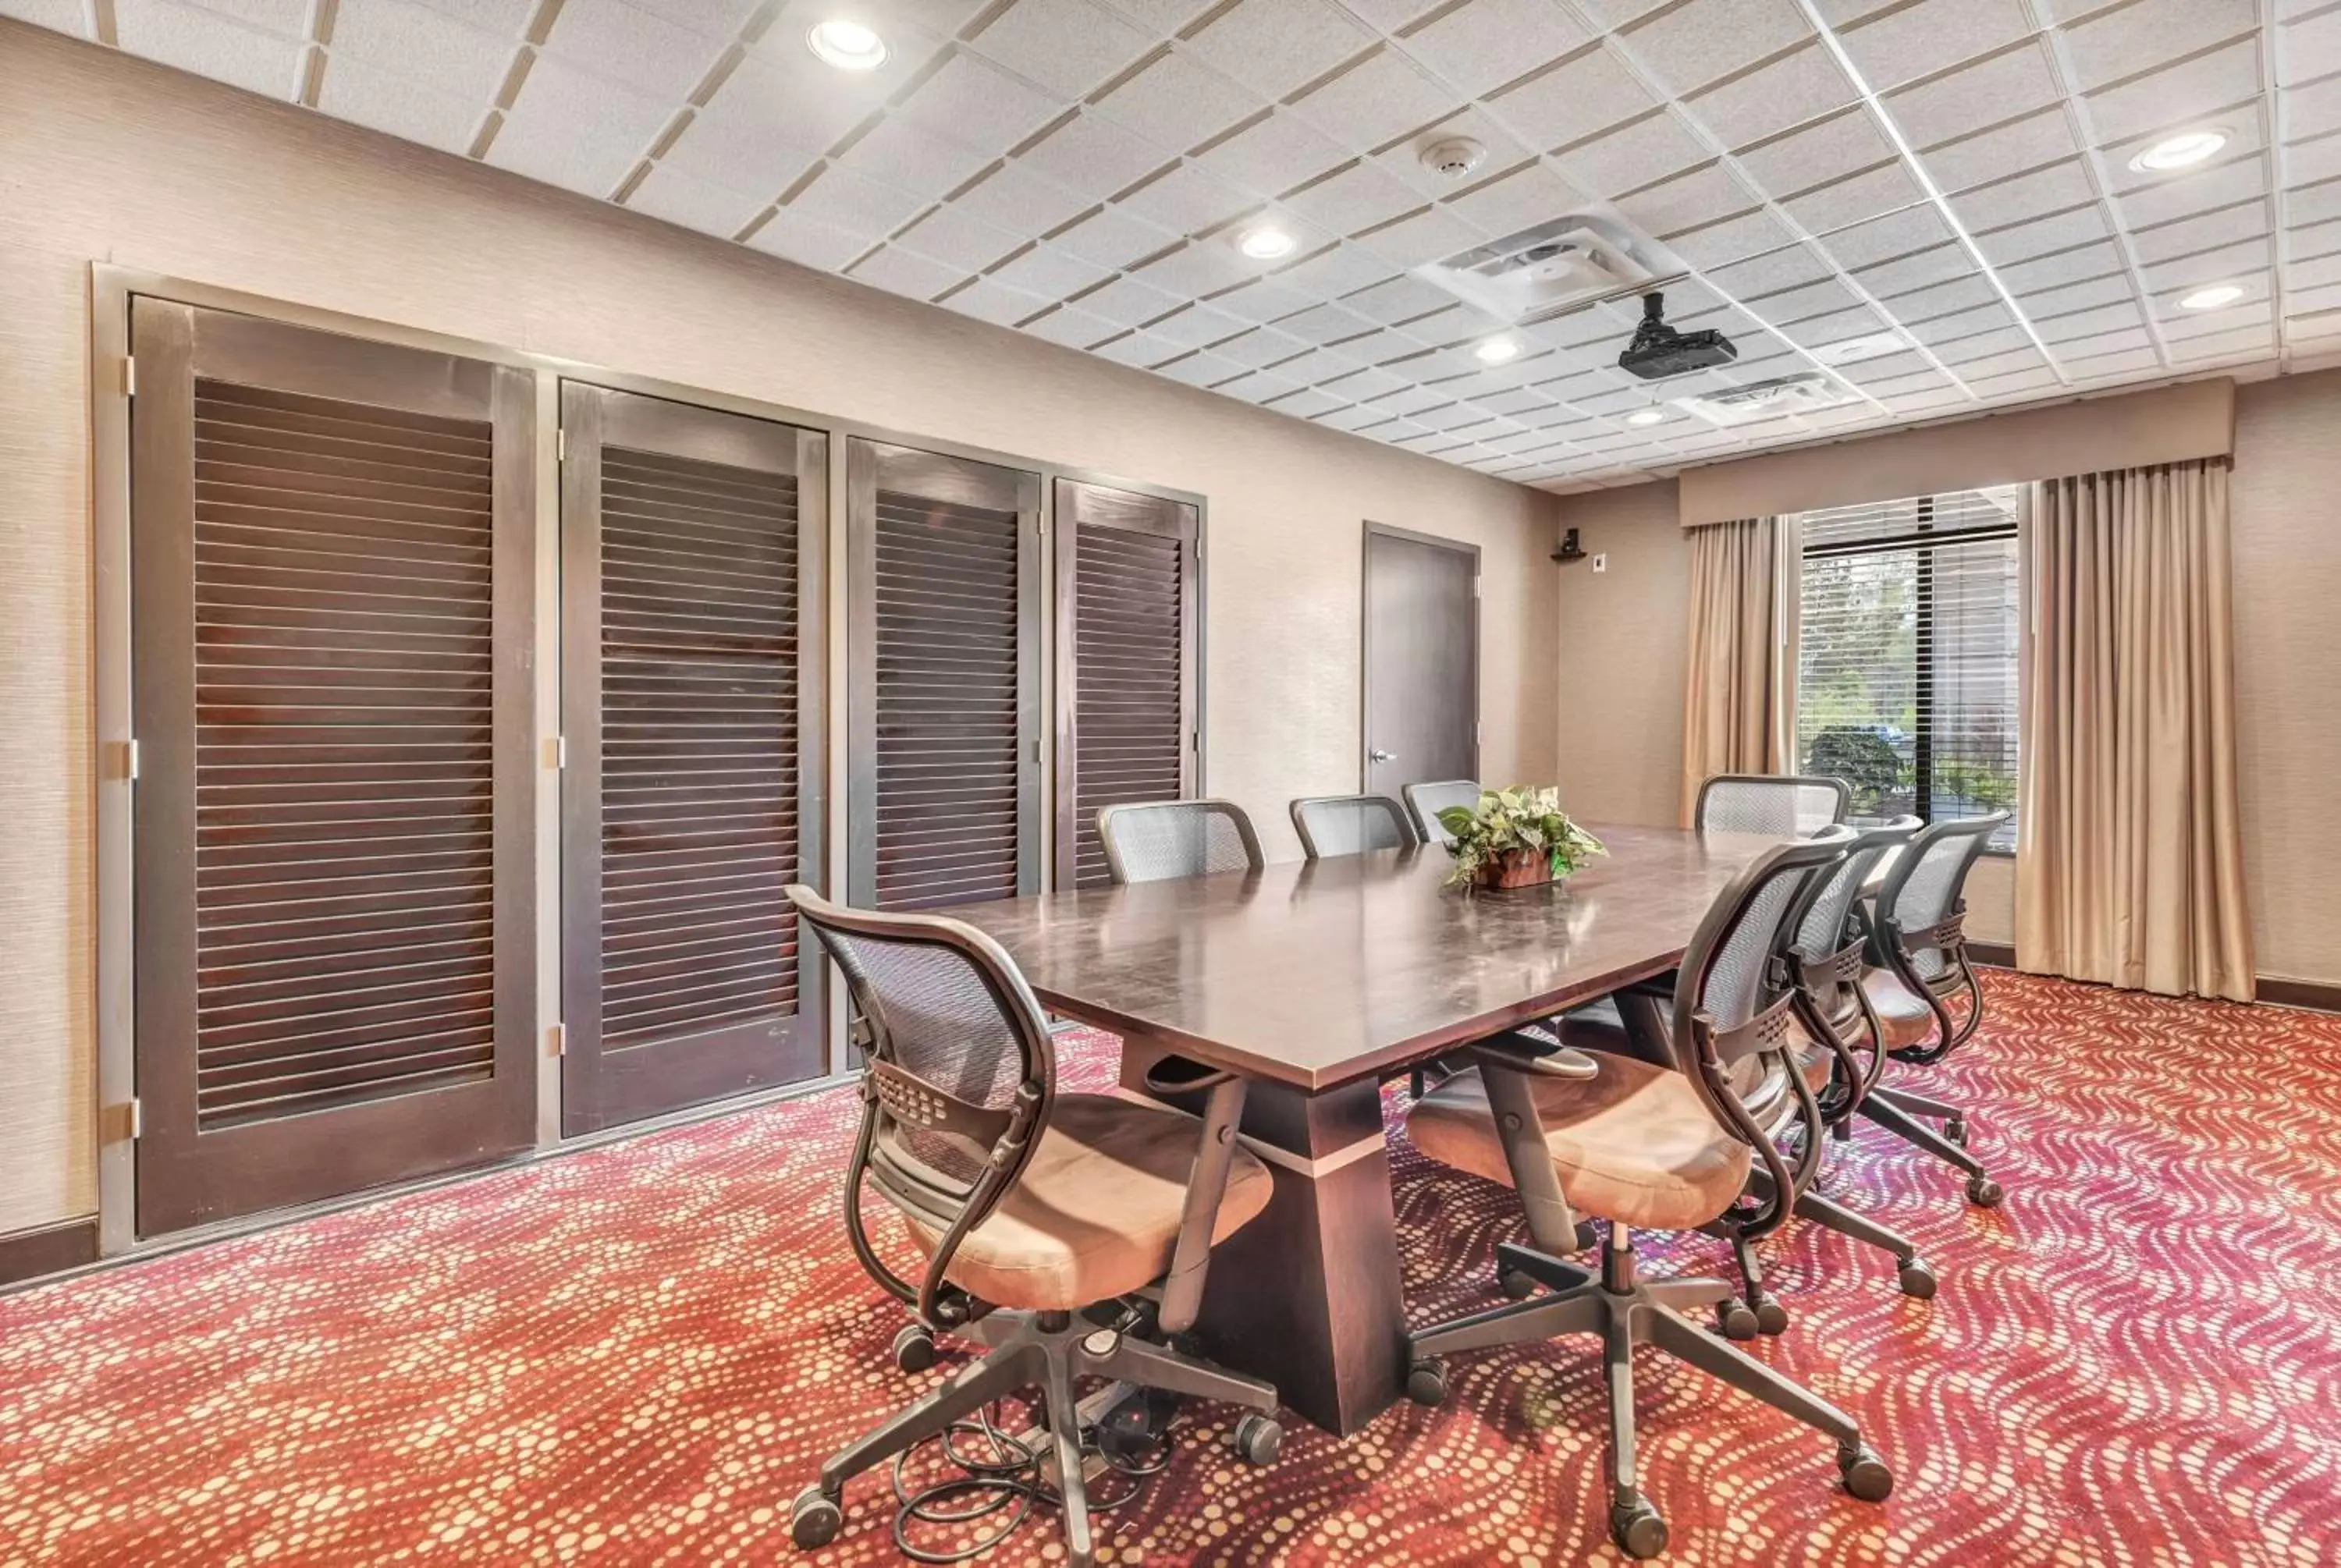 Meeting/conference room in Wingate by Wyndham State Arena Raleigh/Cary Hotel